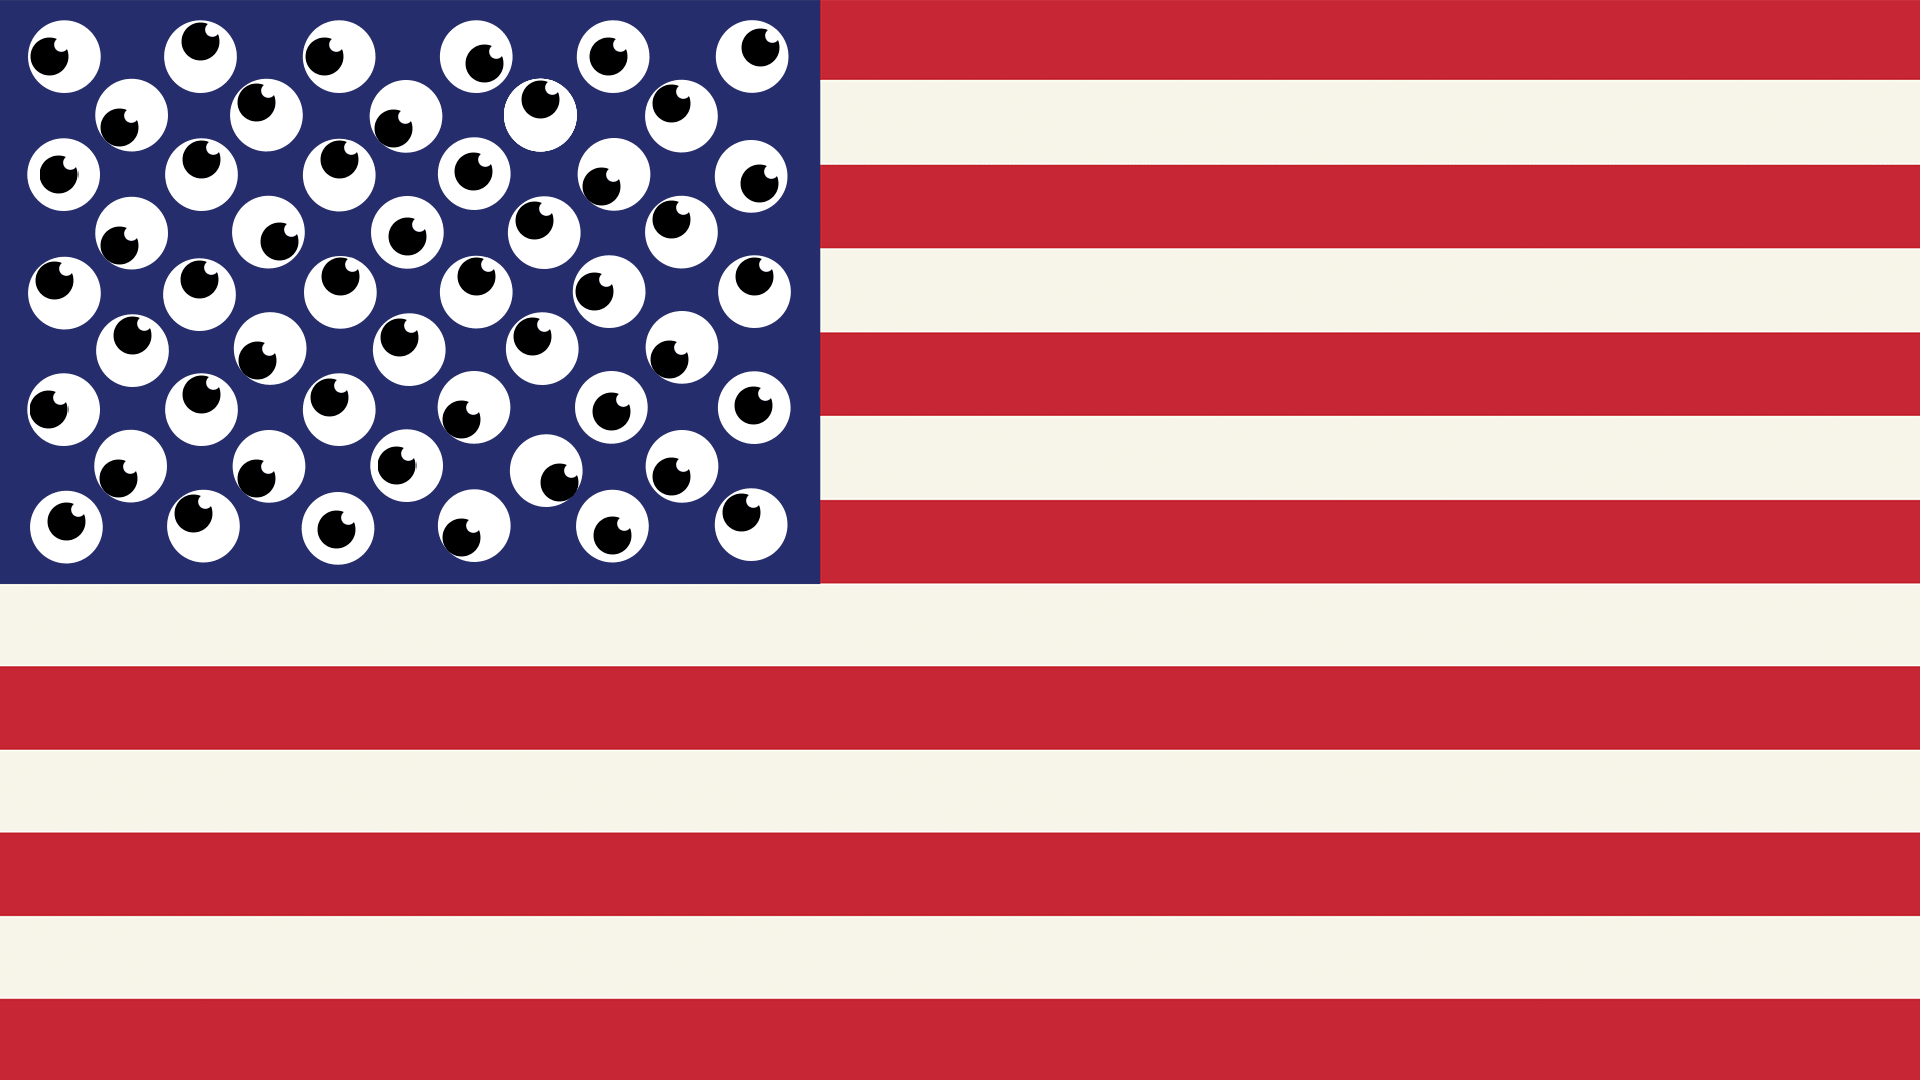 Illustration of an American flag with eyeballs moving instead of stars